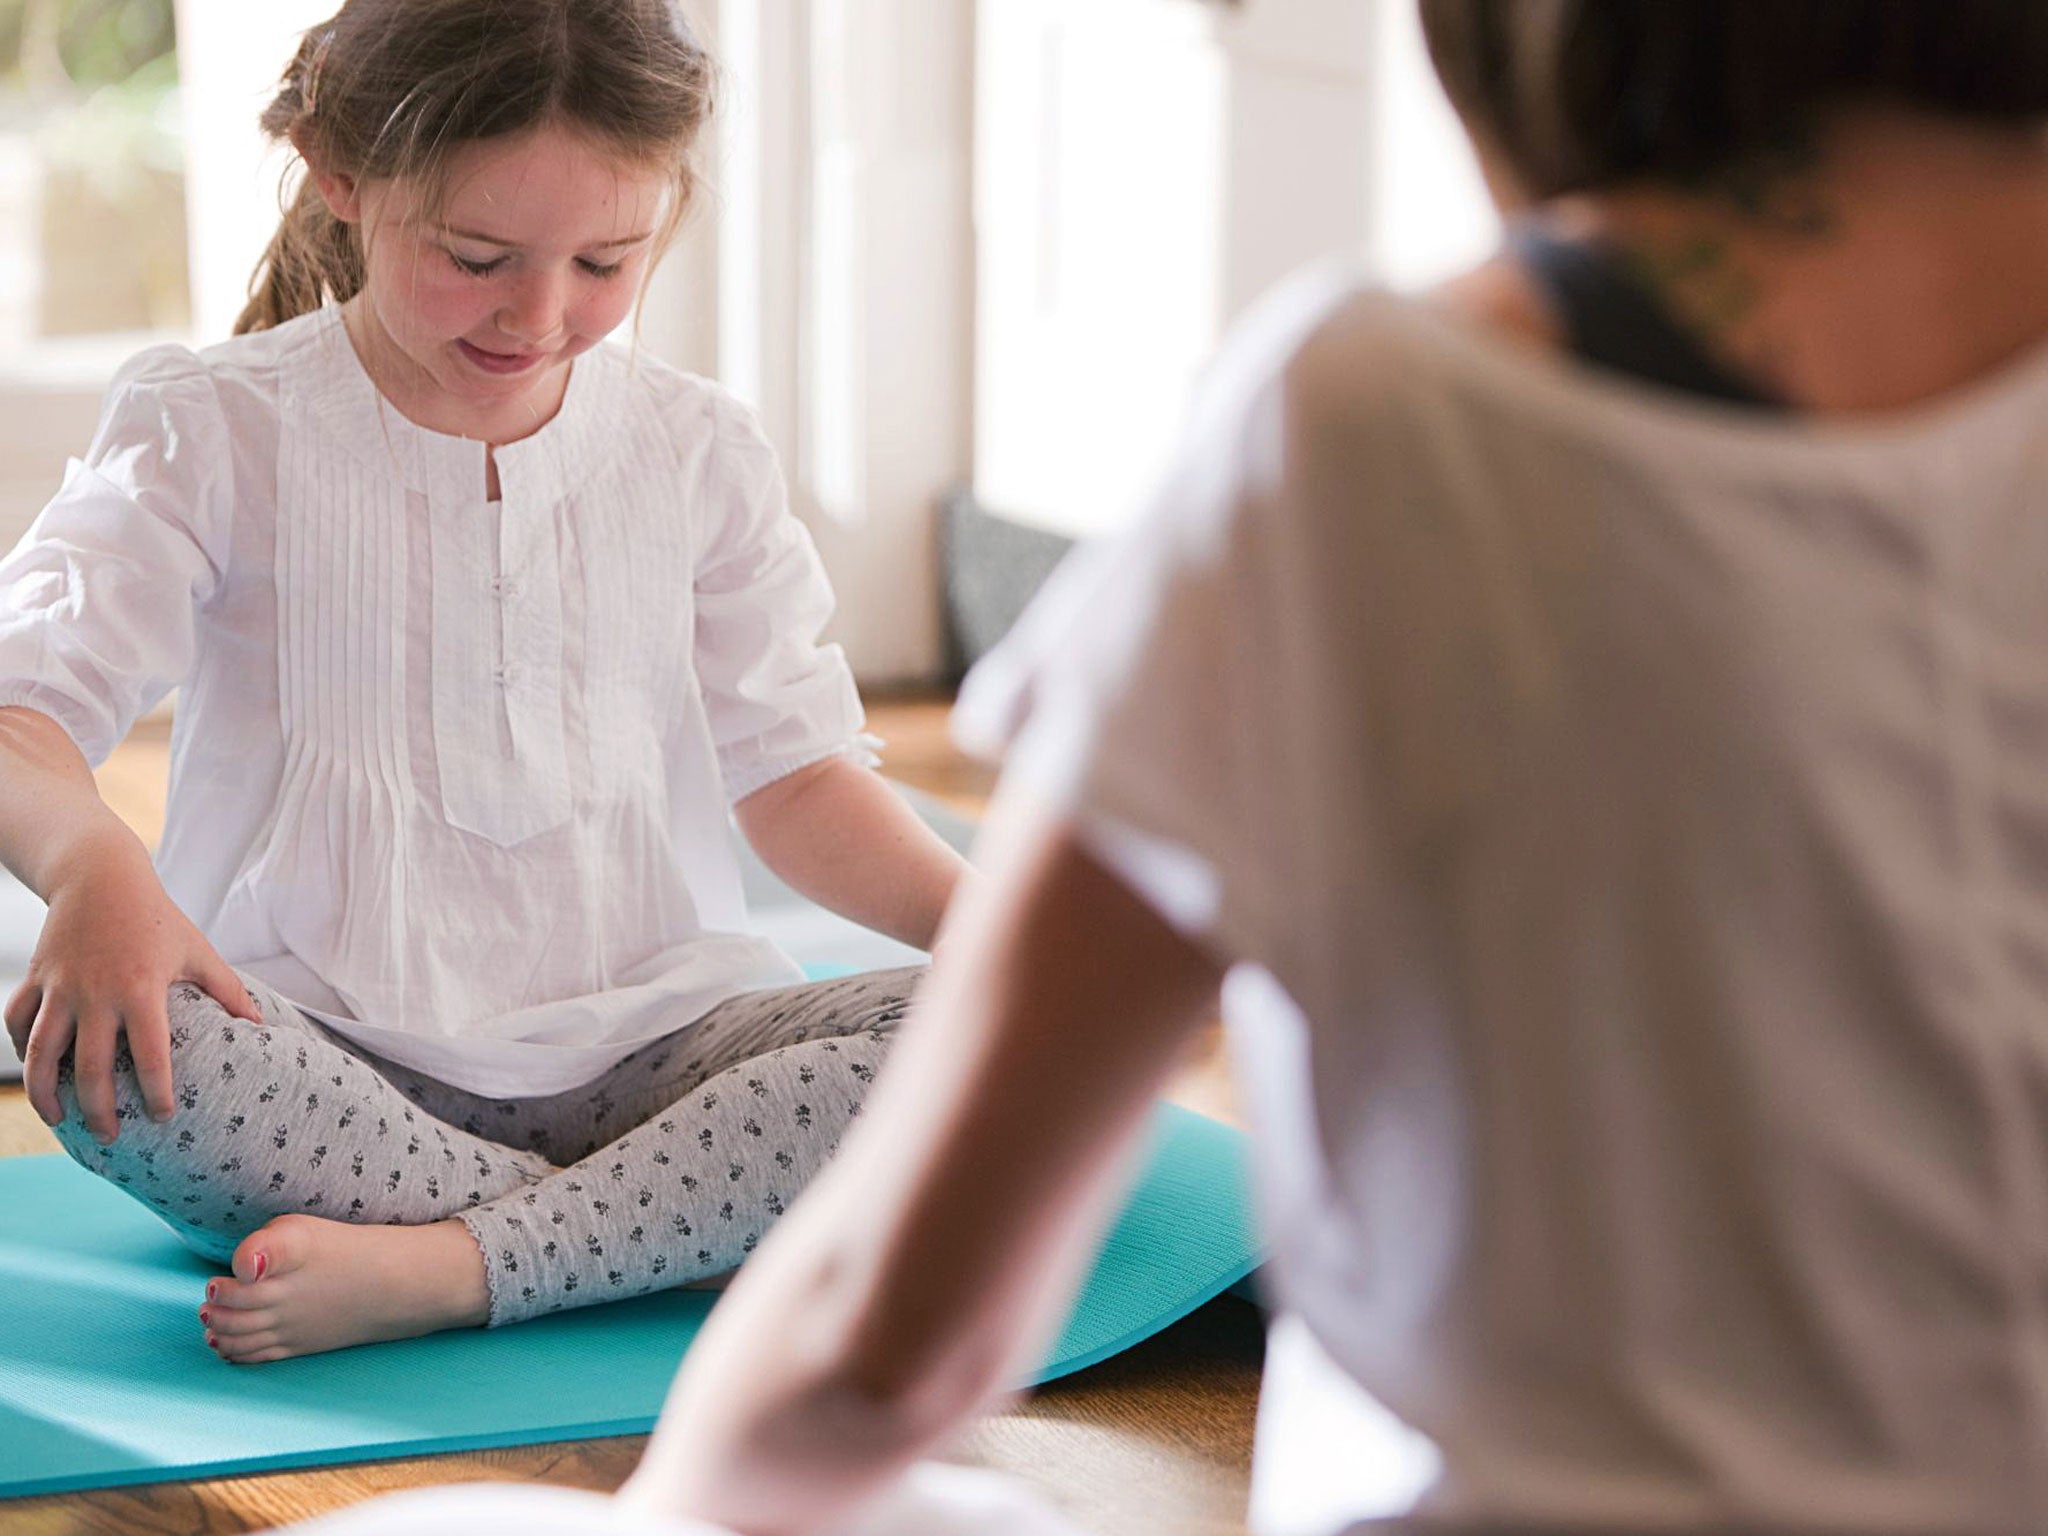 Time out: meditation can tame tantrums and help children sleep